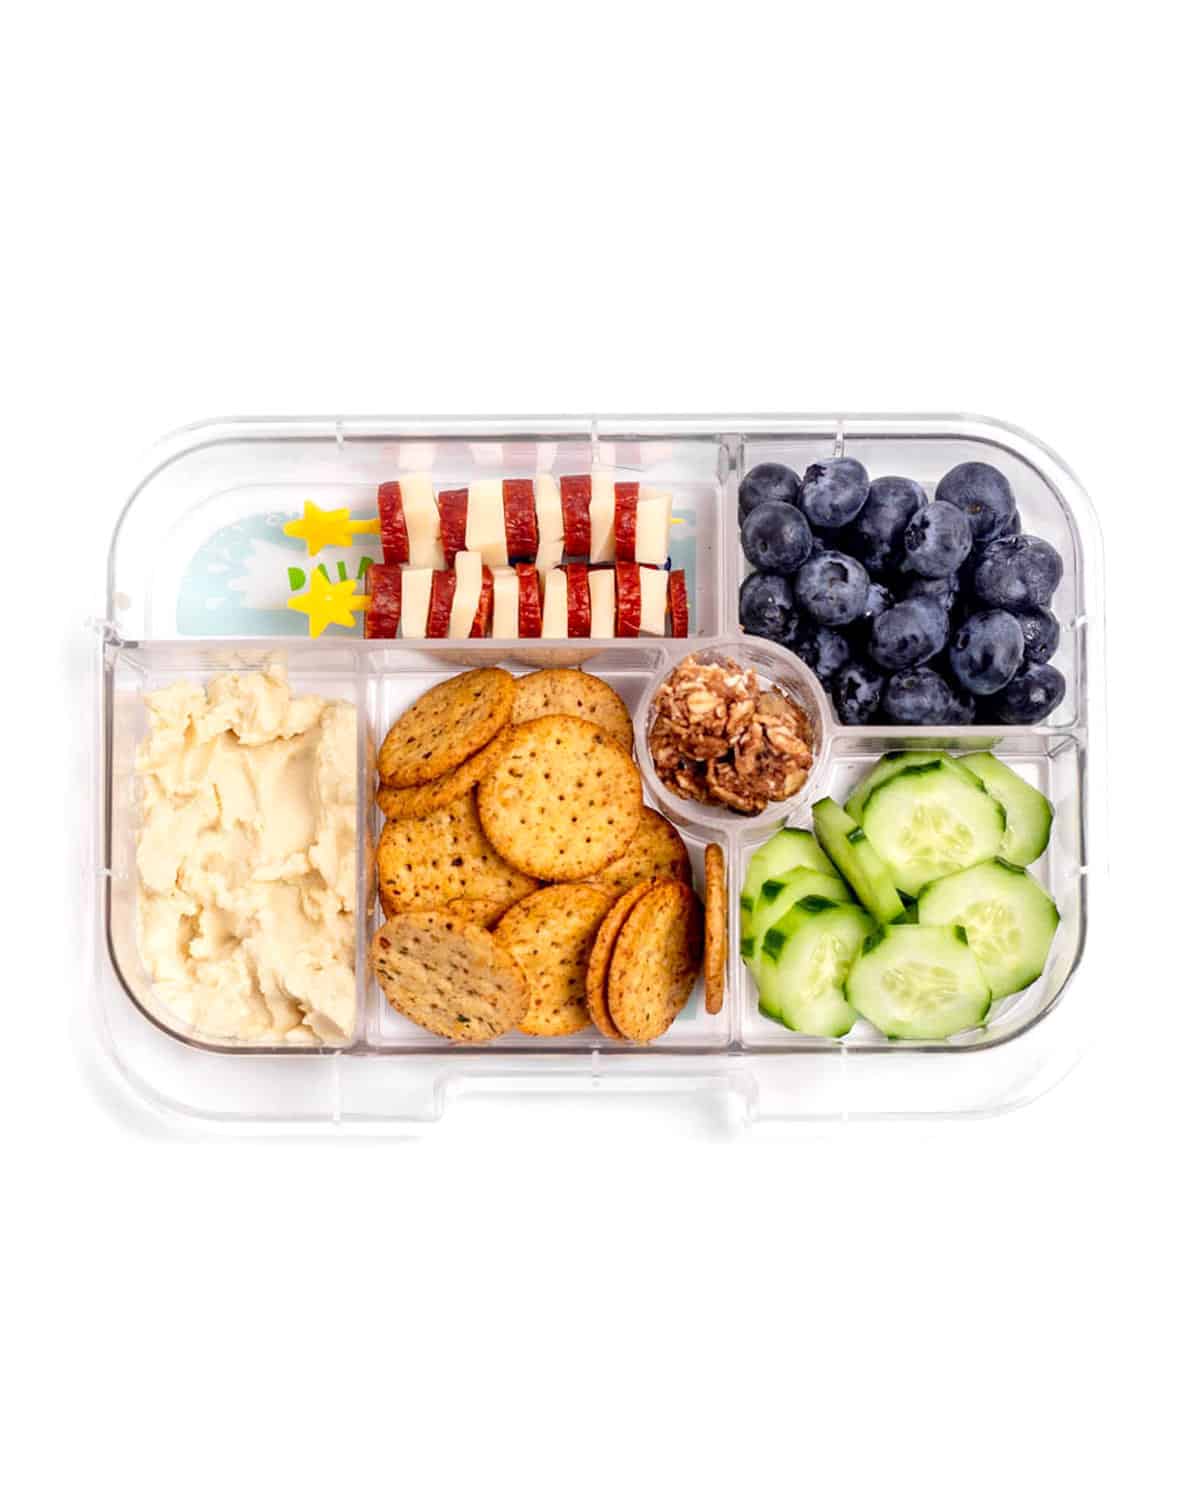 A lunch box with hummus, whole grain crackers, granola bites, cucumber slices, blueberries and mini turkey and pepperoni cheese skewers.